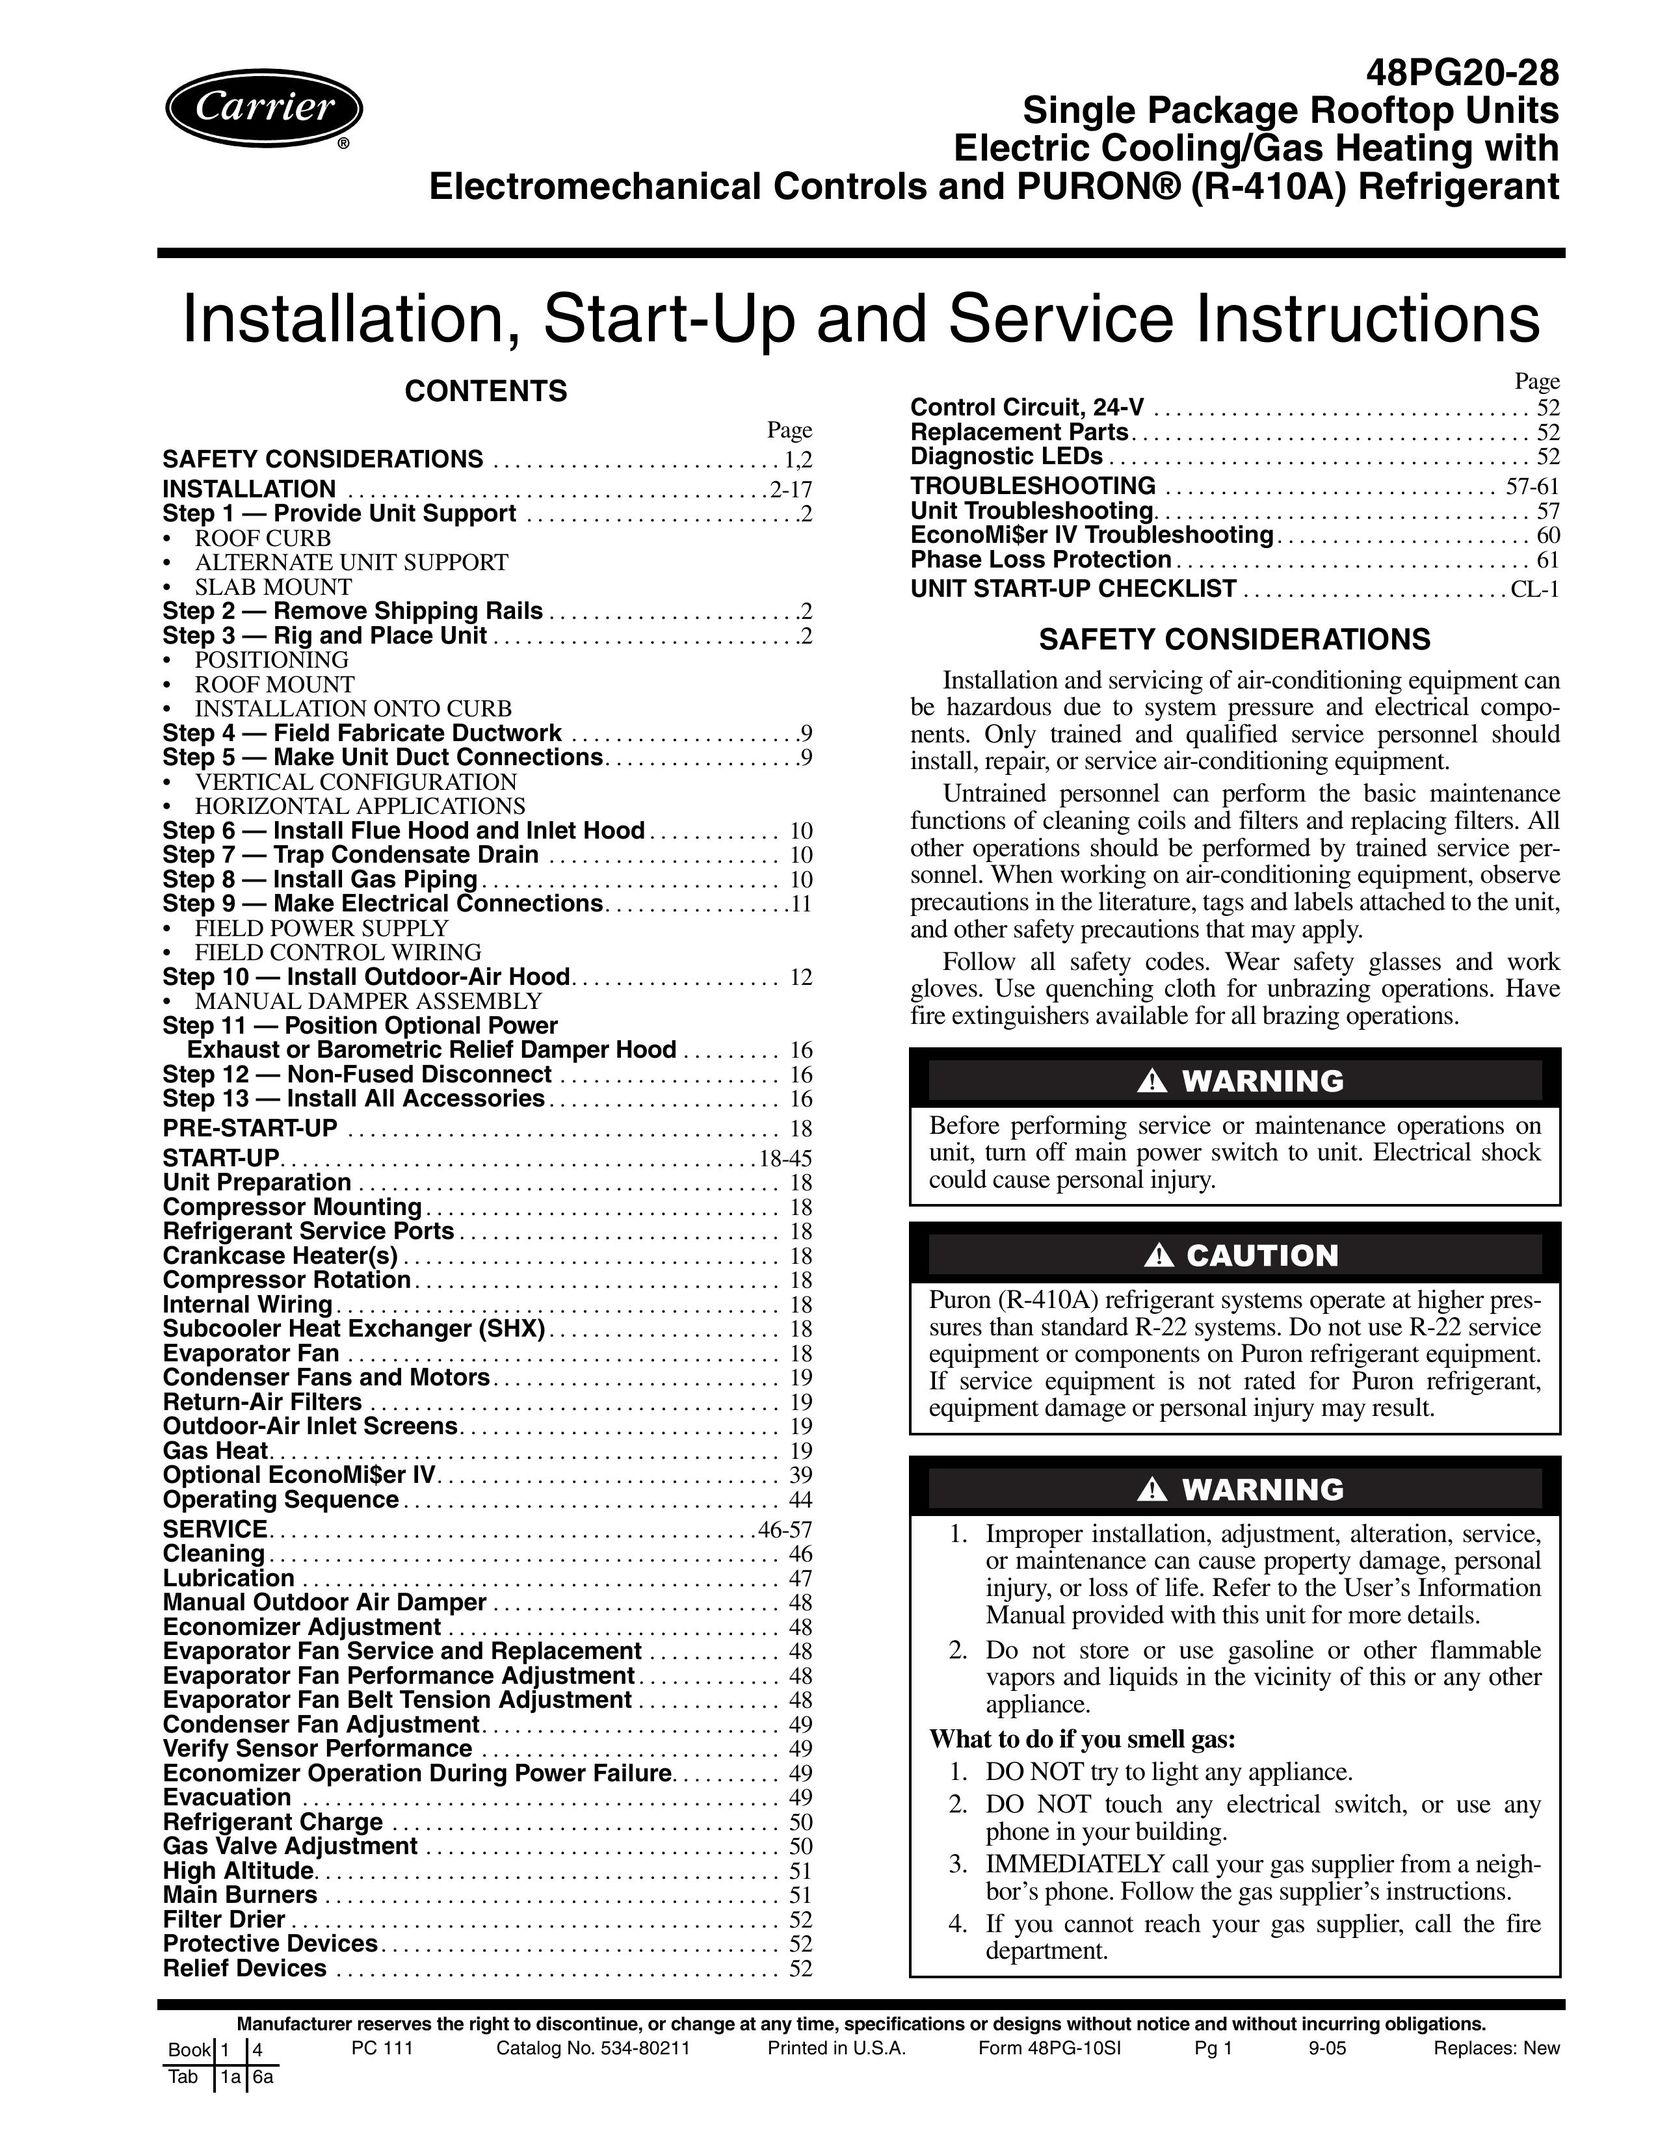 Carrier 48PG20-28 Heating System User Manual